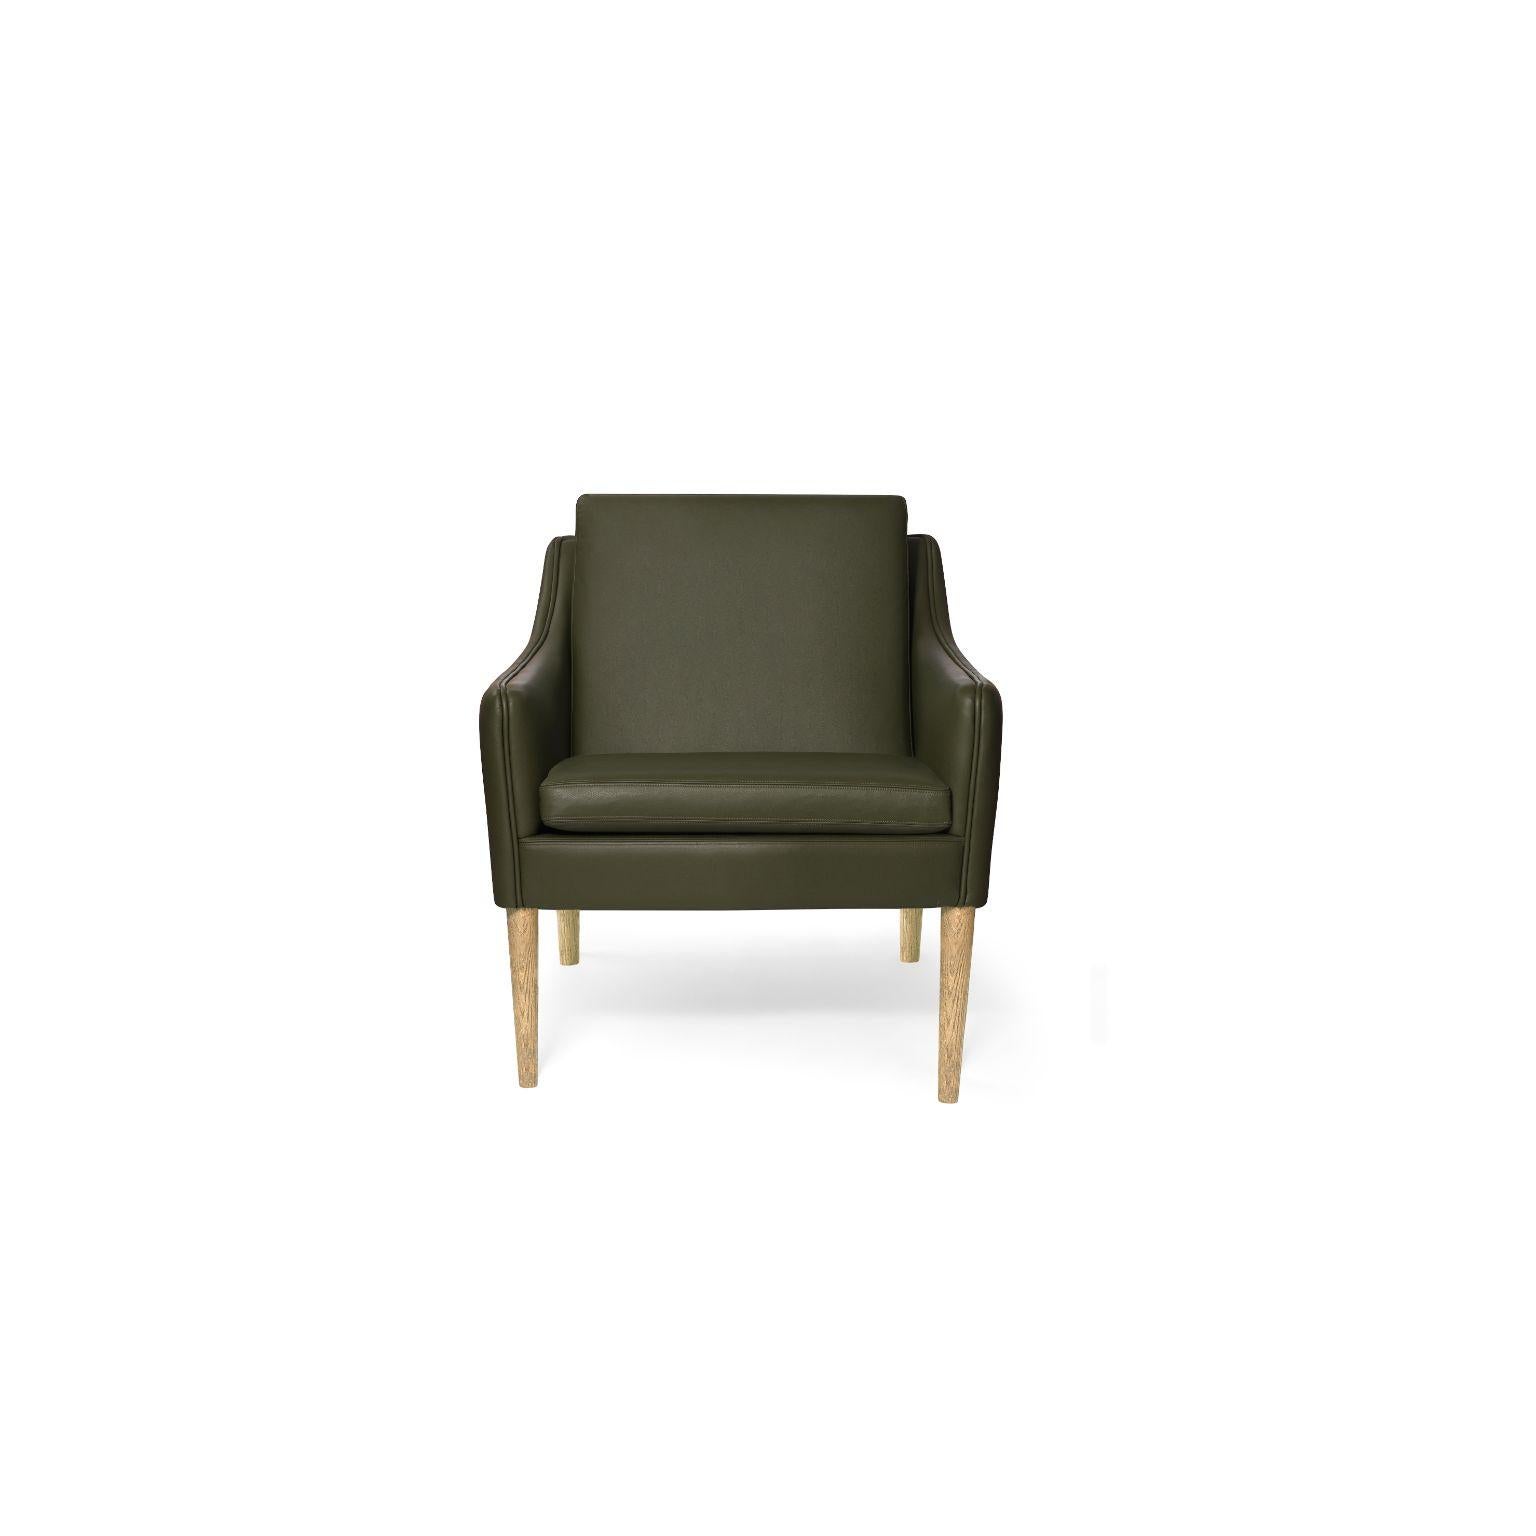 Mr. Olsen Lounge chair Solid Smoked Oak Pickle Green Leather by Warm Nordic
Dimensions: D81 x W79 x H 78 cm
Material: Textile upholstery, Foam, Spring system, Oak, Leather
Weight: 27 kg
Also available in different colors, materials and finishes. 

A